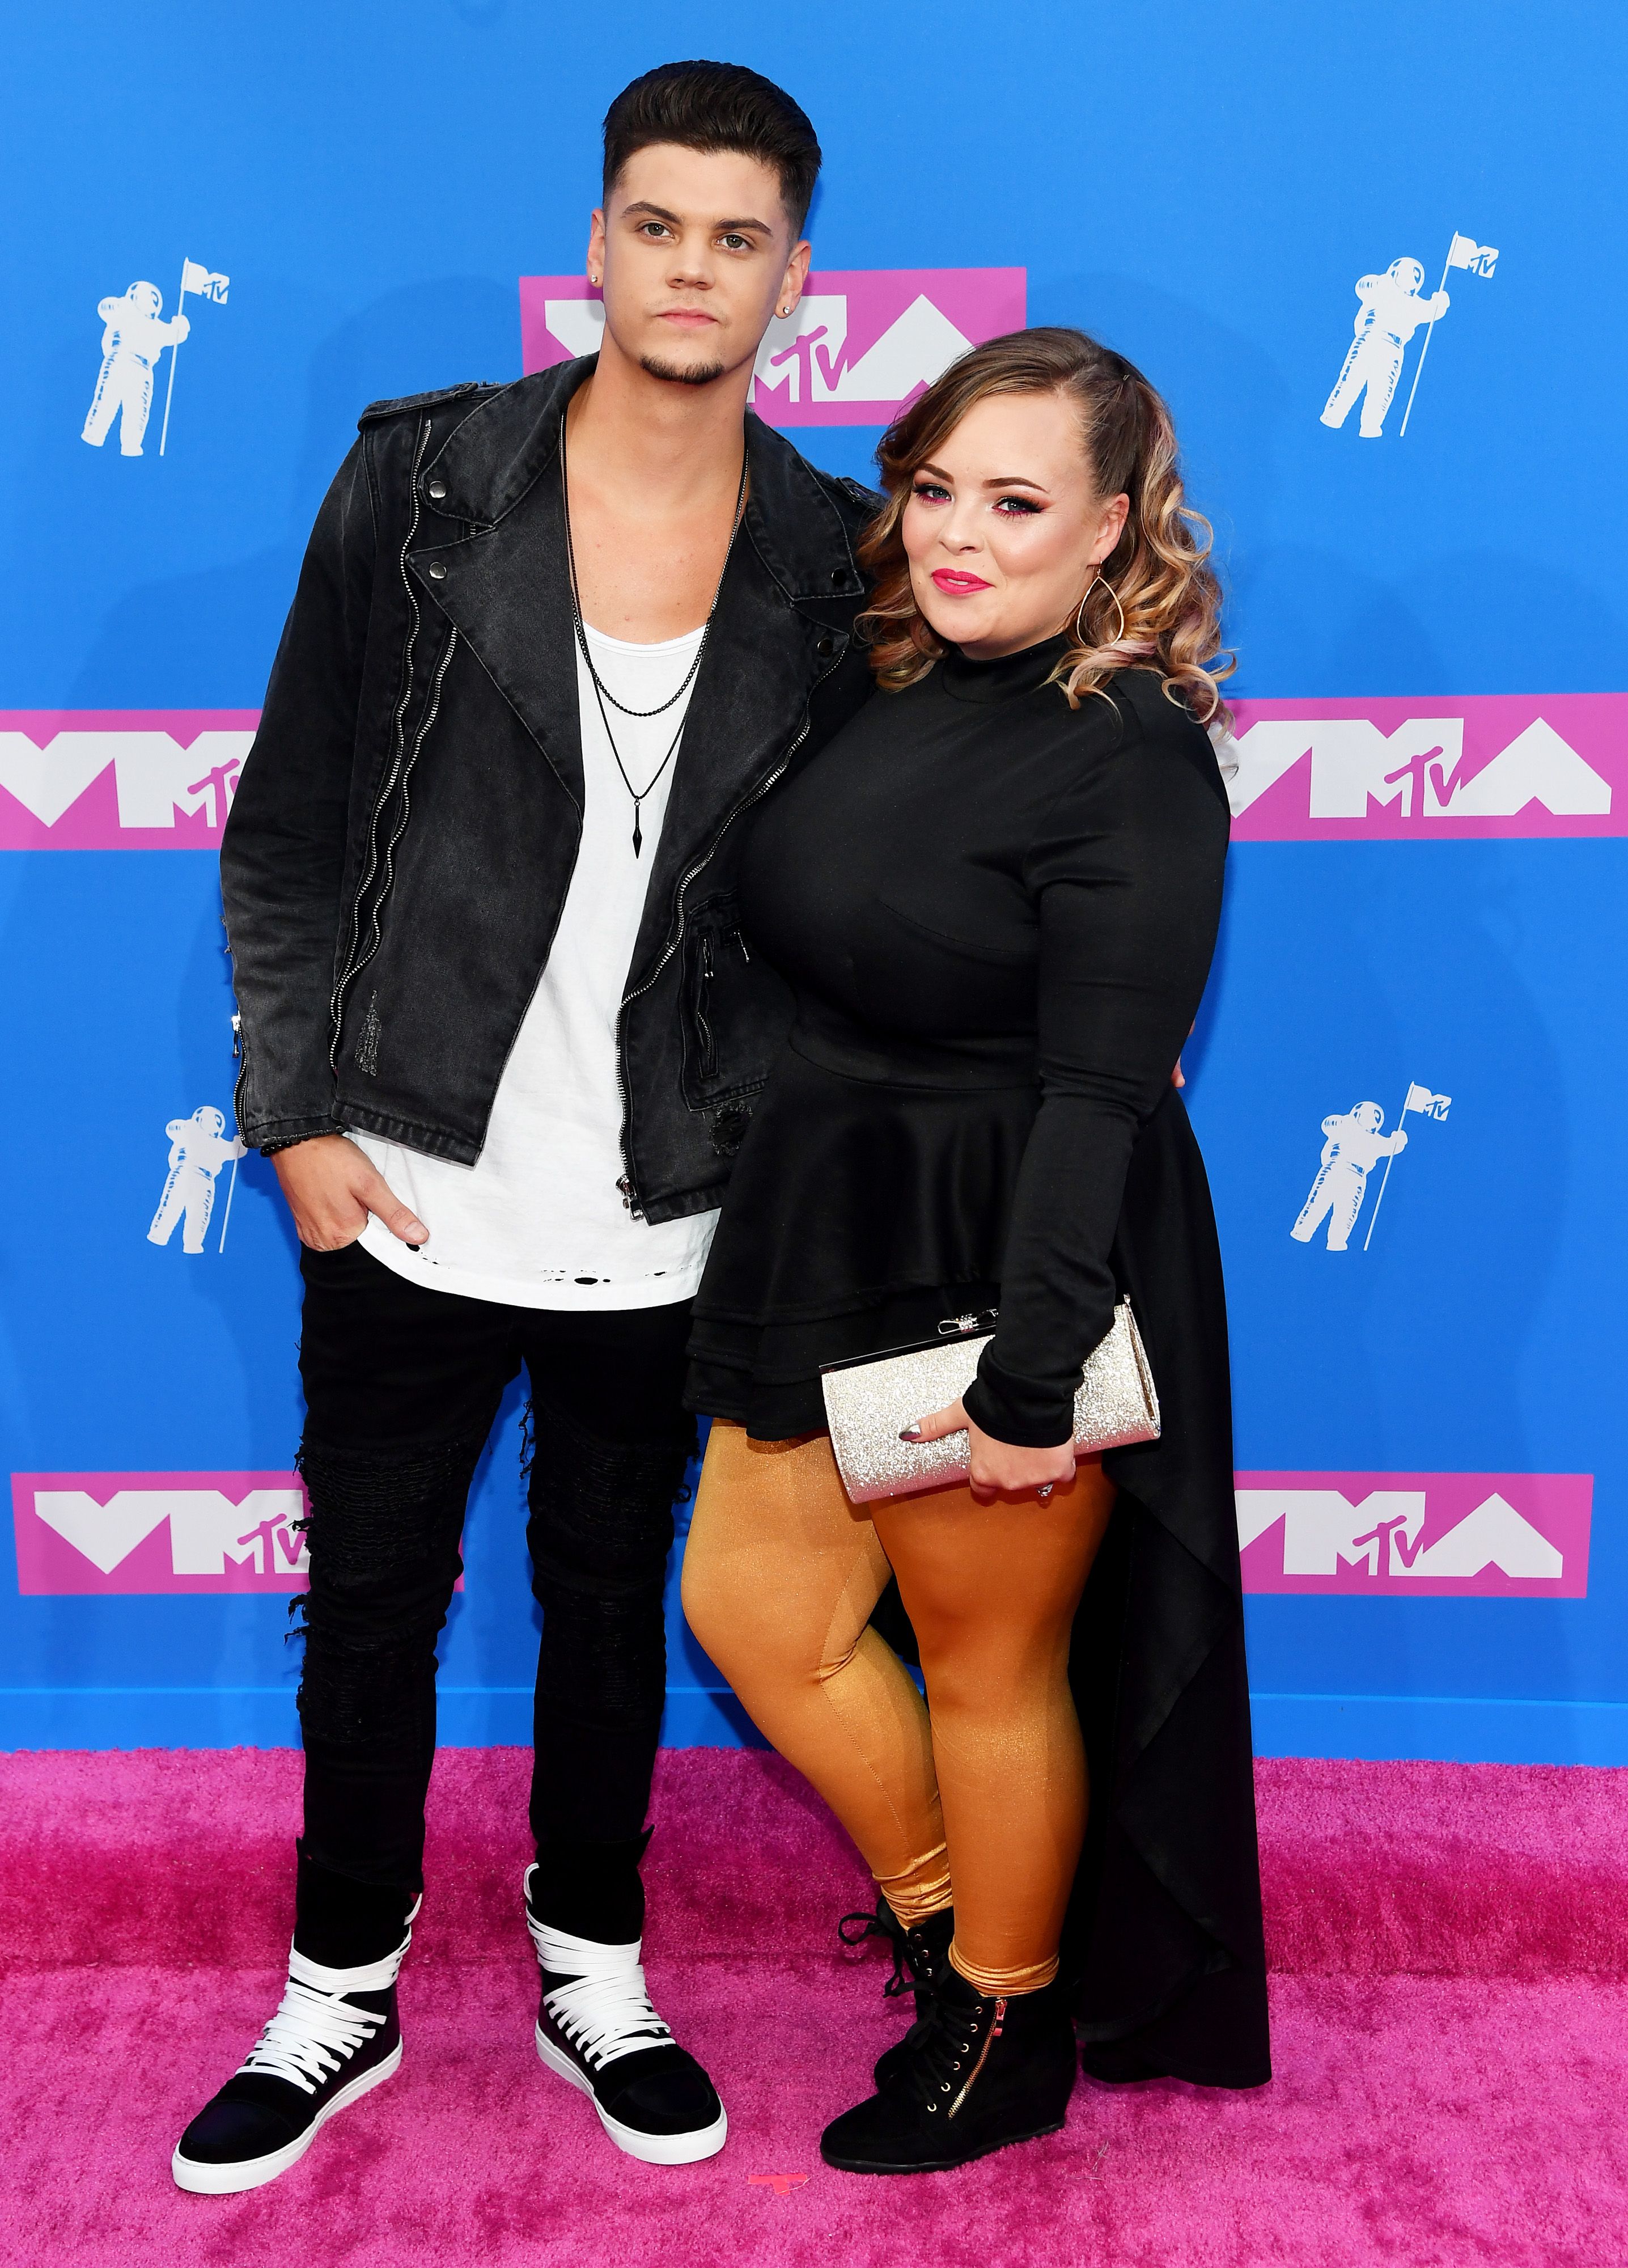 Tyler Baltierra and Catelynn Lowell at the MTV Video Music Awards on August 20, 2018, in New York City | Photo: Nicholas Hunt/Getty Images